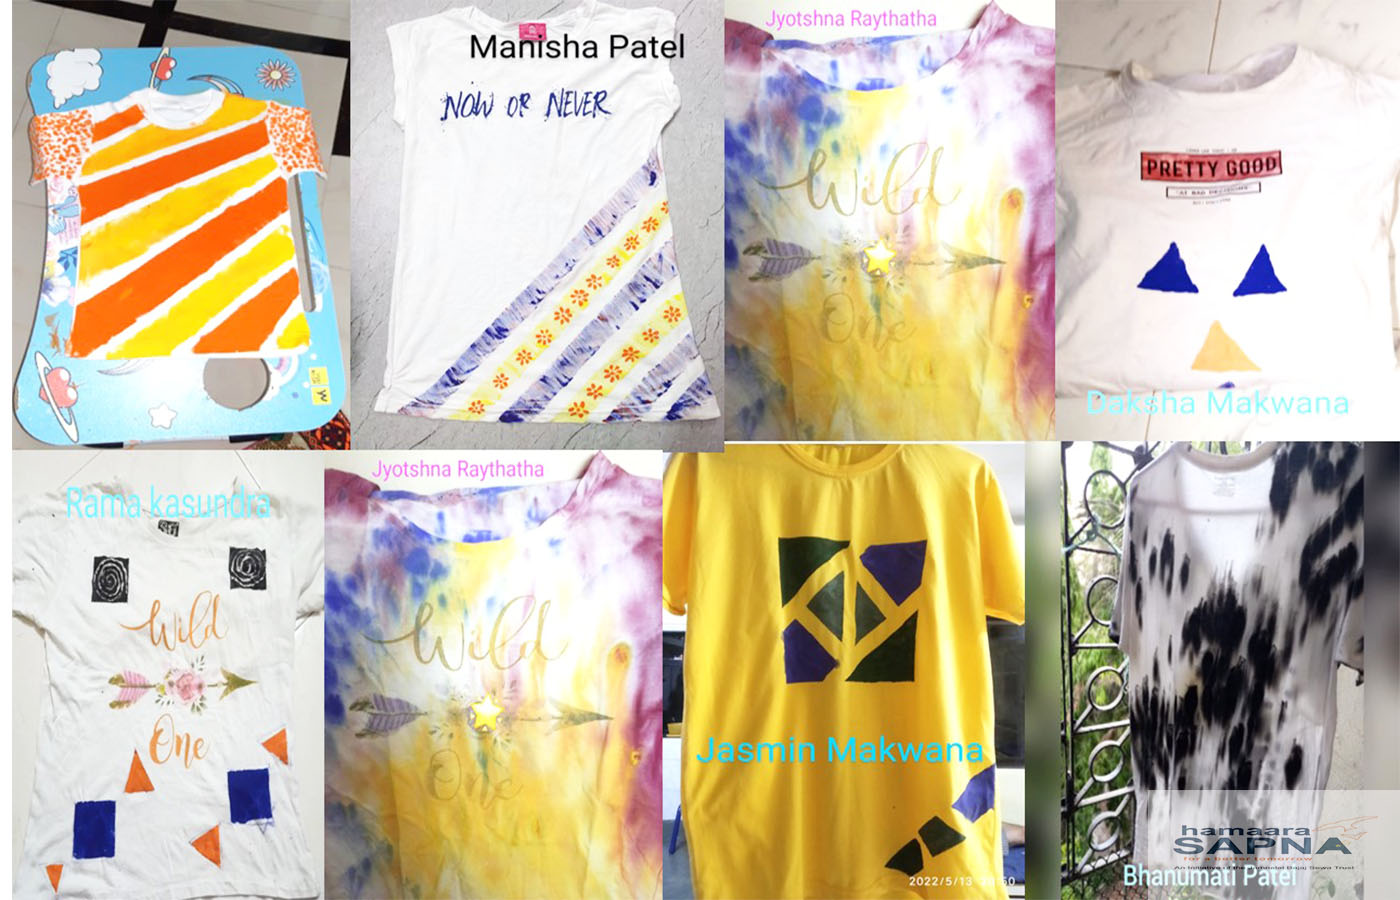 Let that artist in you shine. T- shirt painting was a lovely way to make your own beautiful painted t- shirts